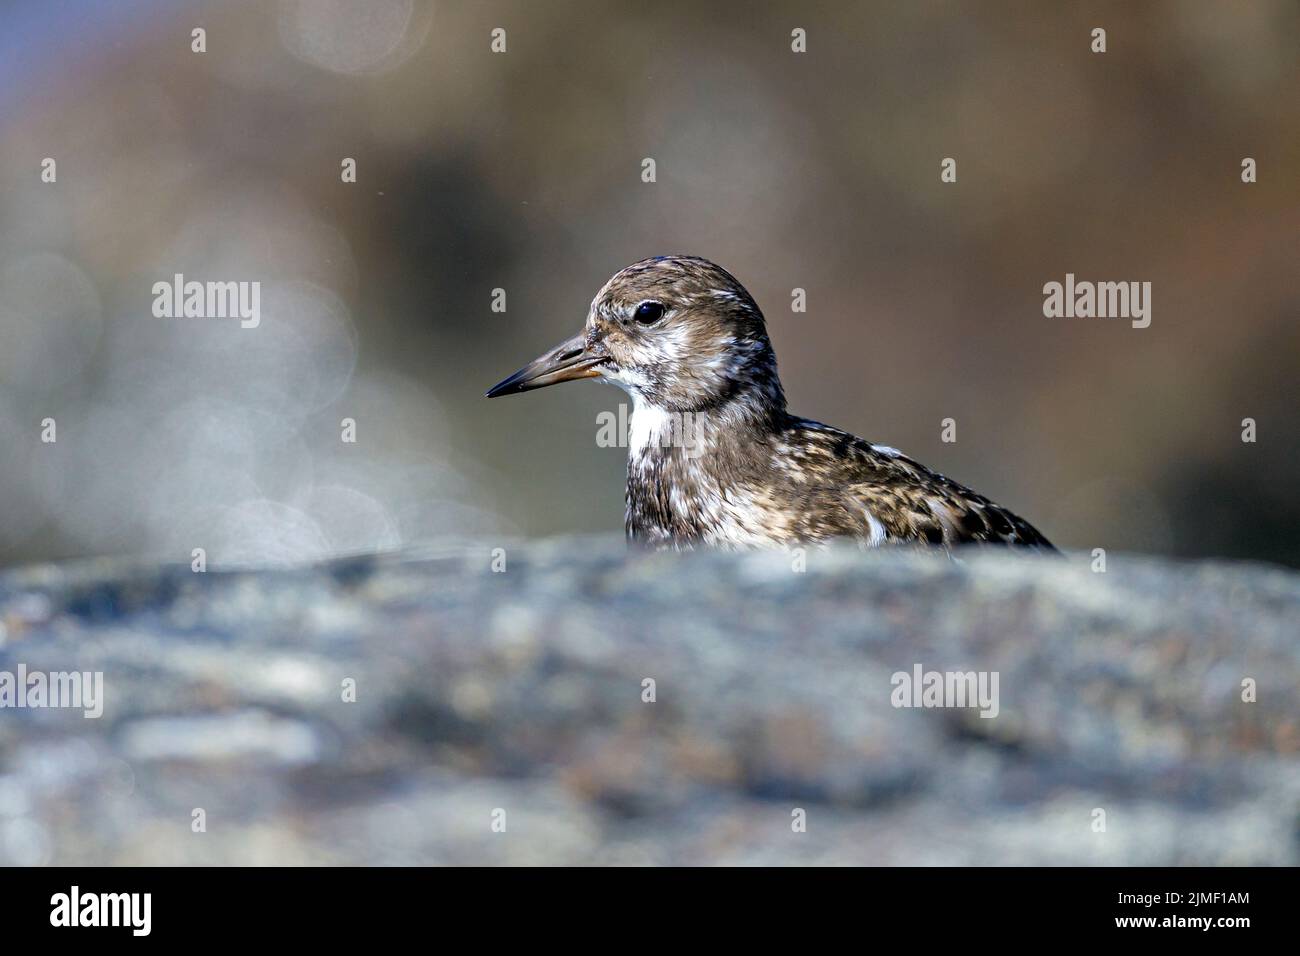 Ruddy Turnstone has found a place sheltered from the wind between rocks / Arenaria interpres Stock Photo